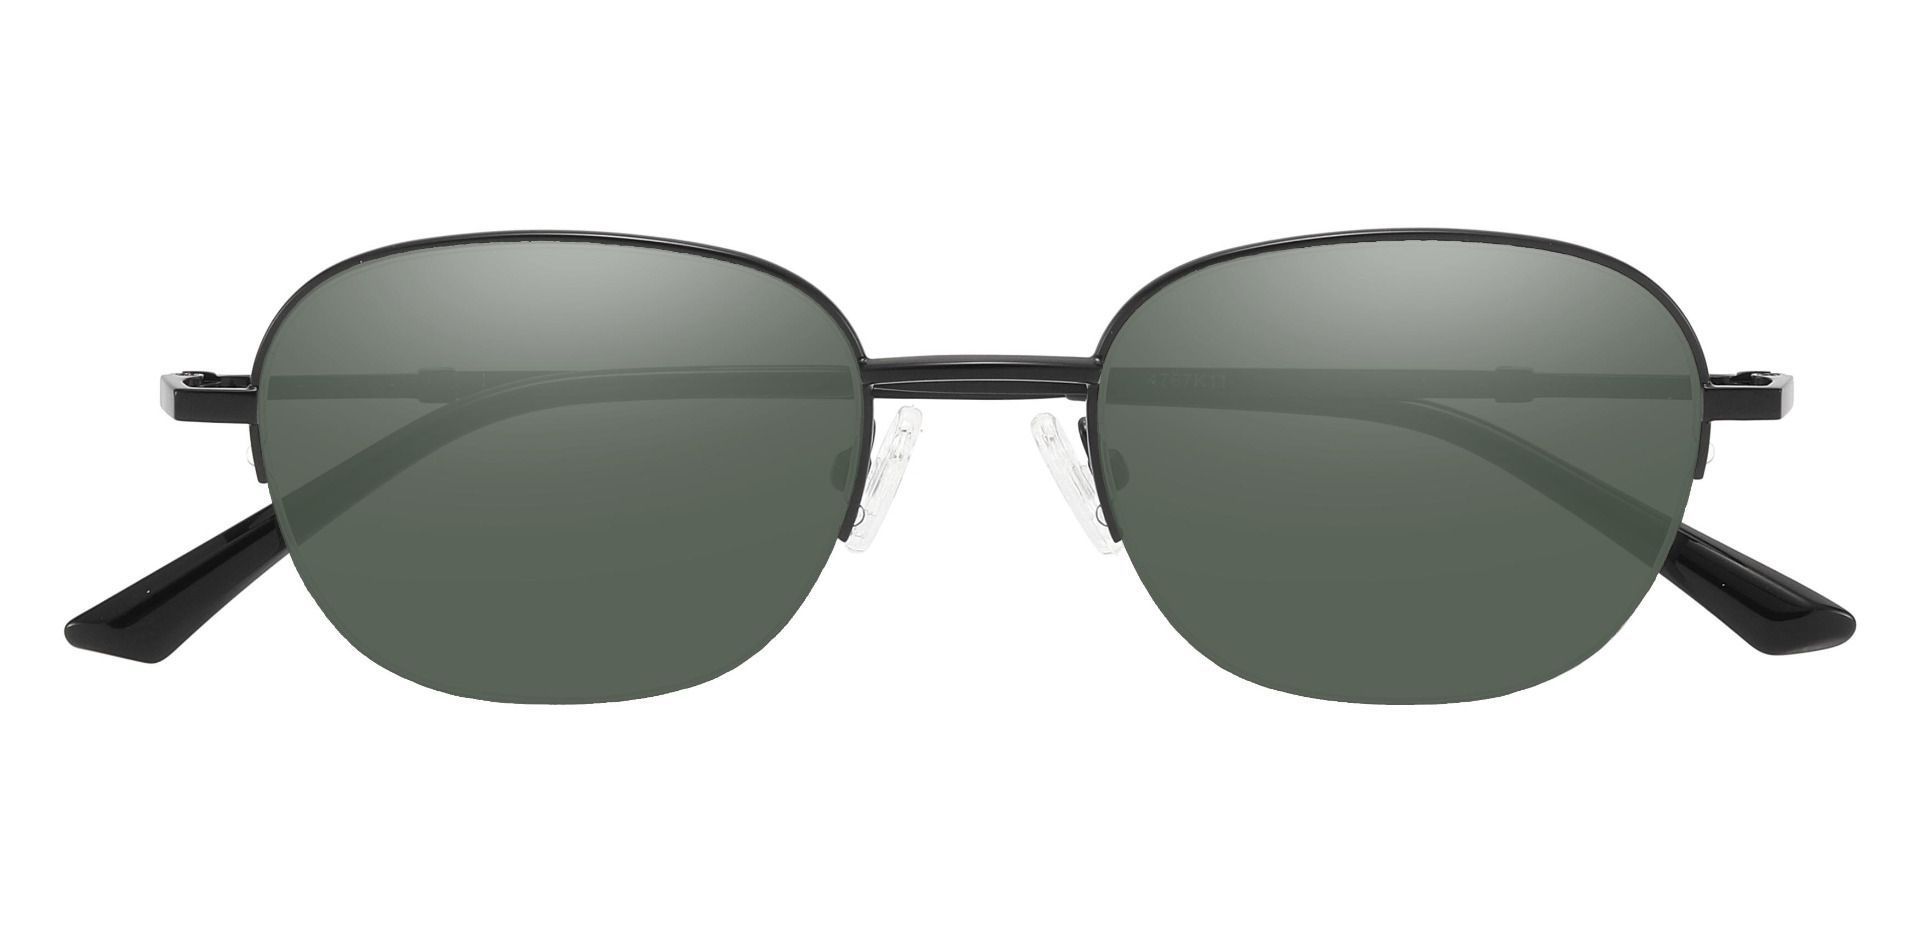 Rochester Oval Lined Bifocal Sunglasses - Black Frame With Green Lenses